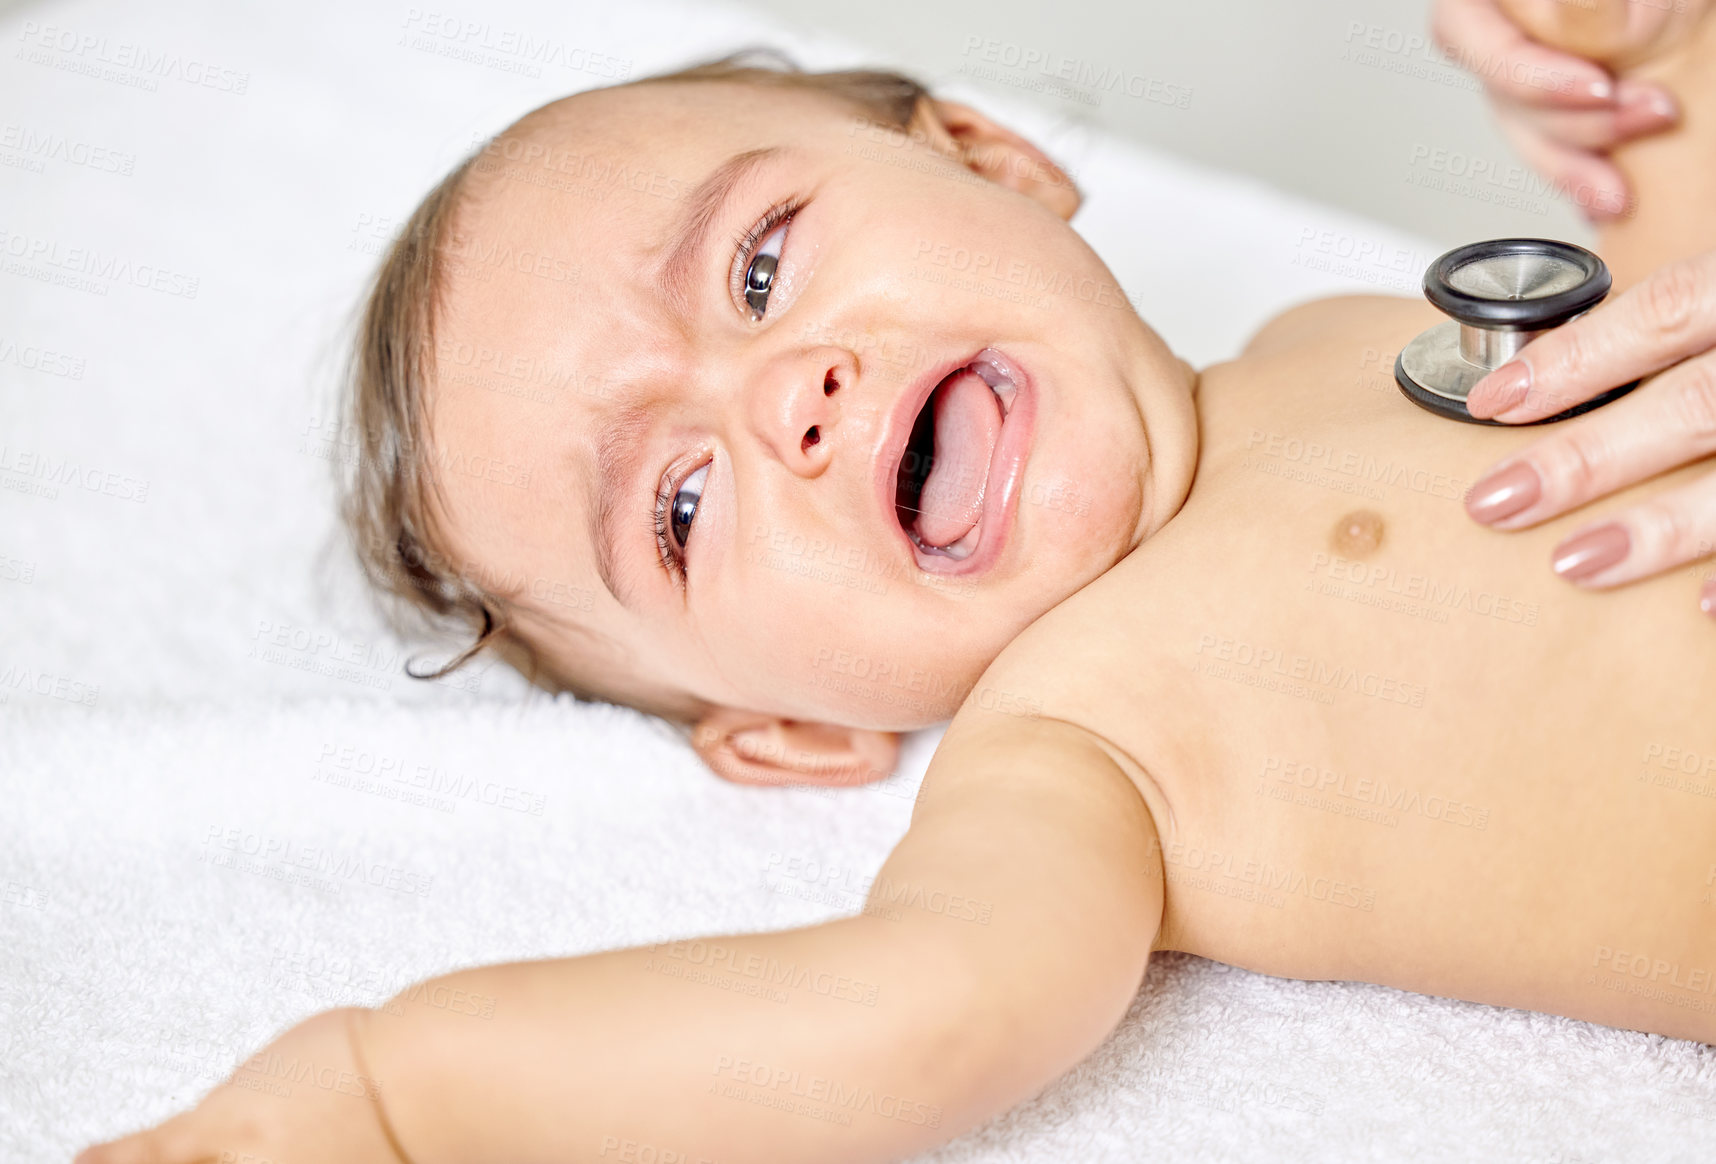 Buy stock photo Shot of a little baby having its chest checked by a female doctor